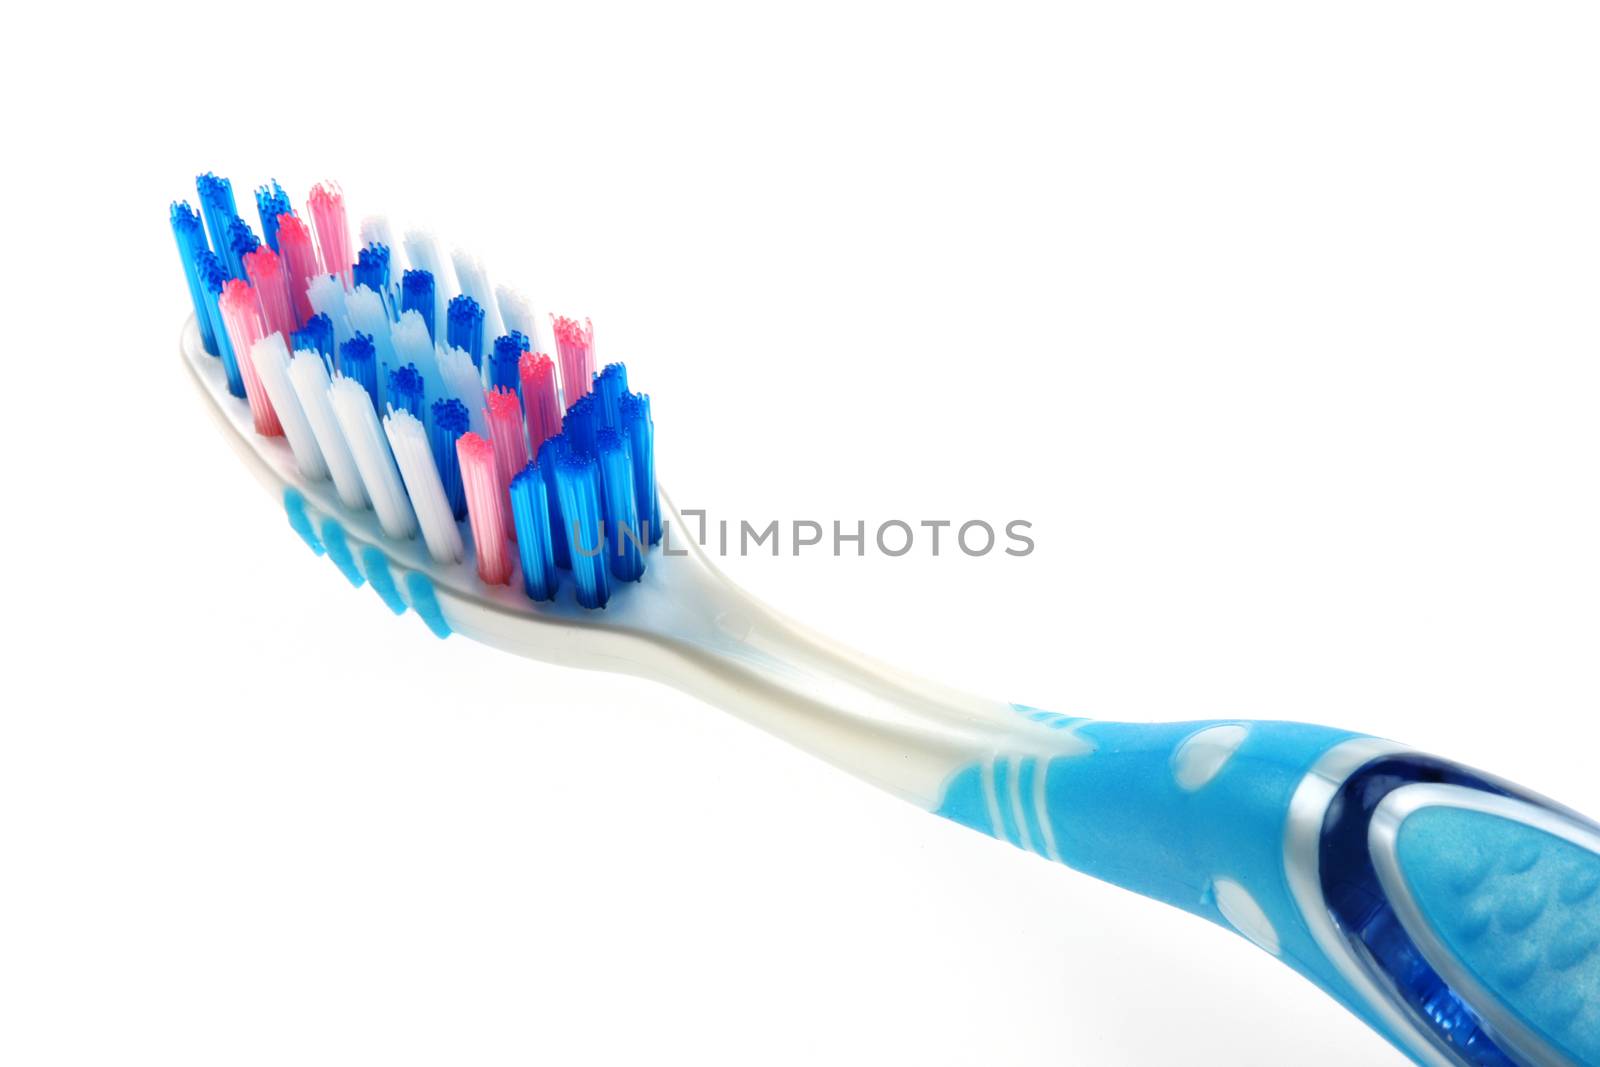 Toothbrush by Whiteboxmedia